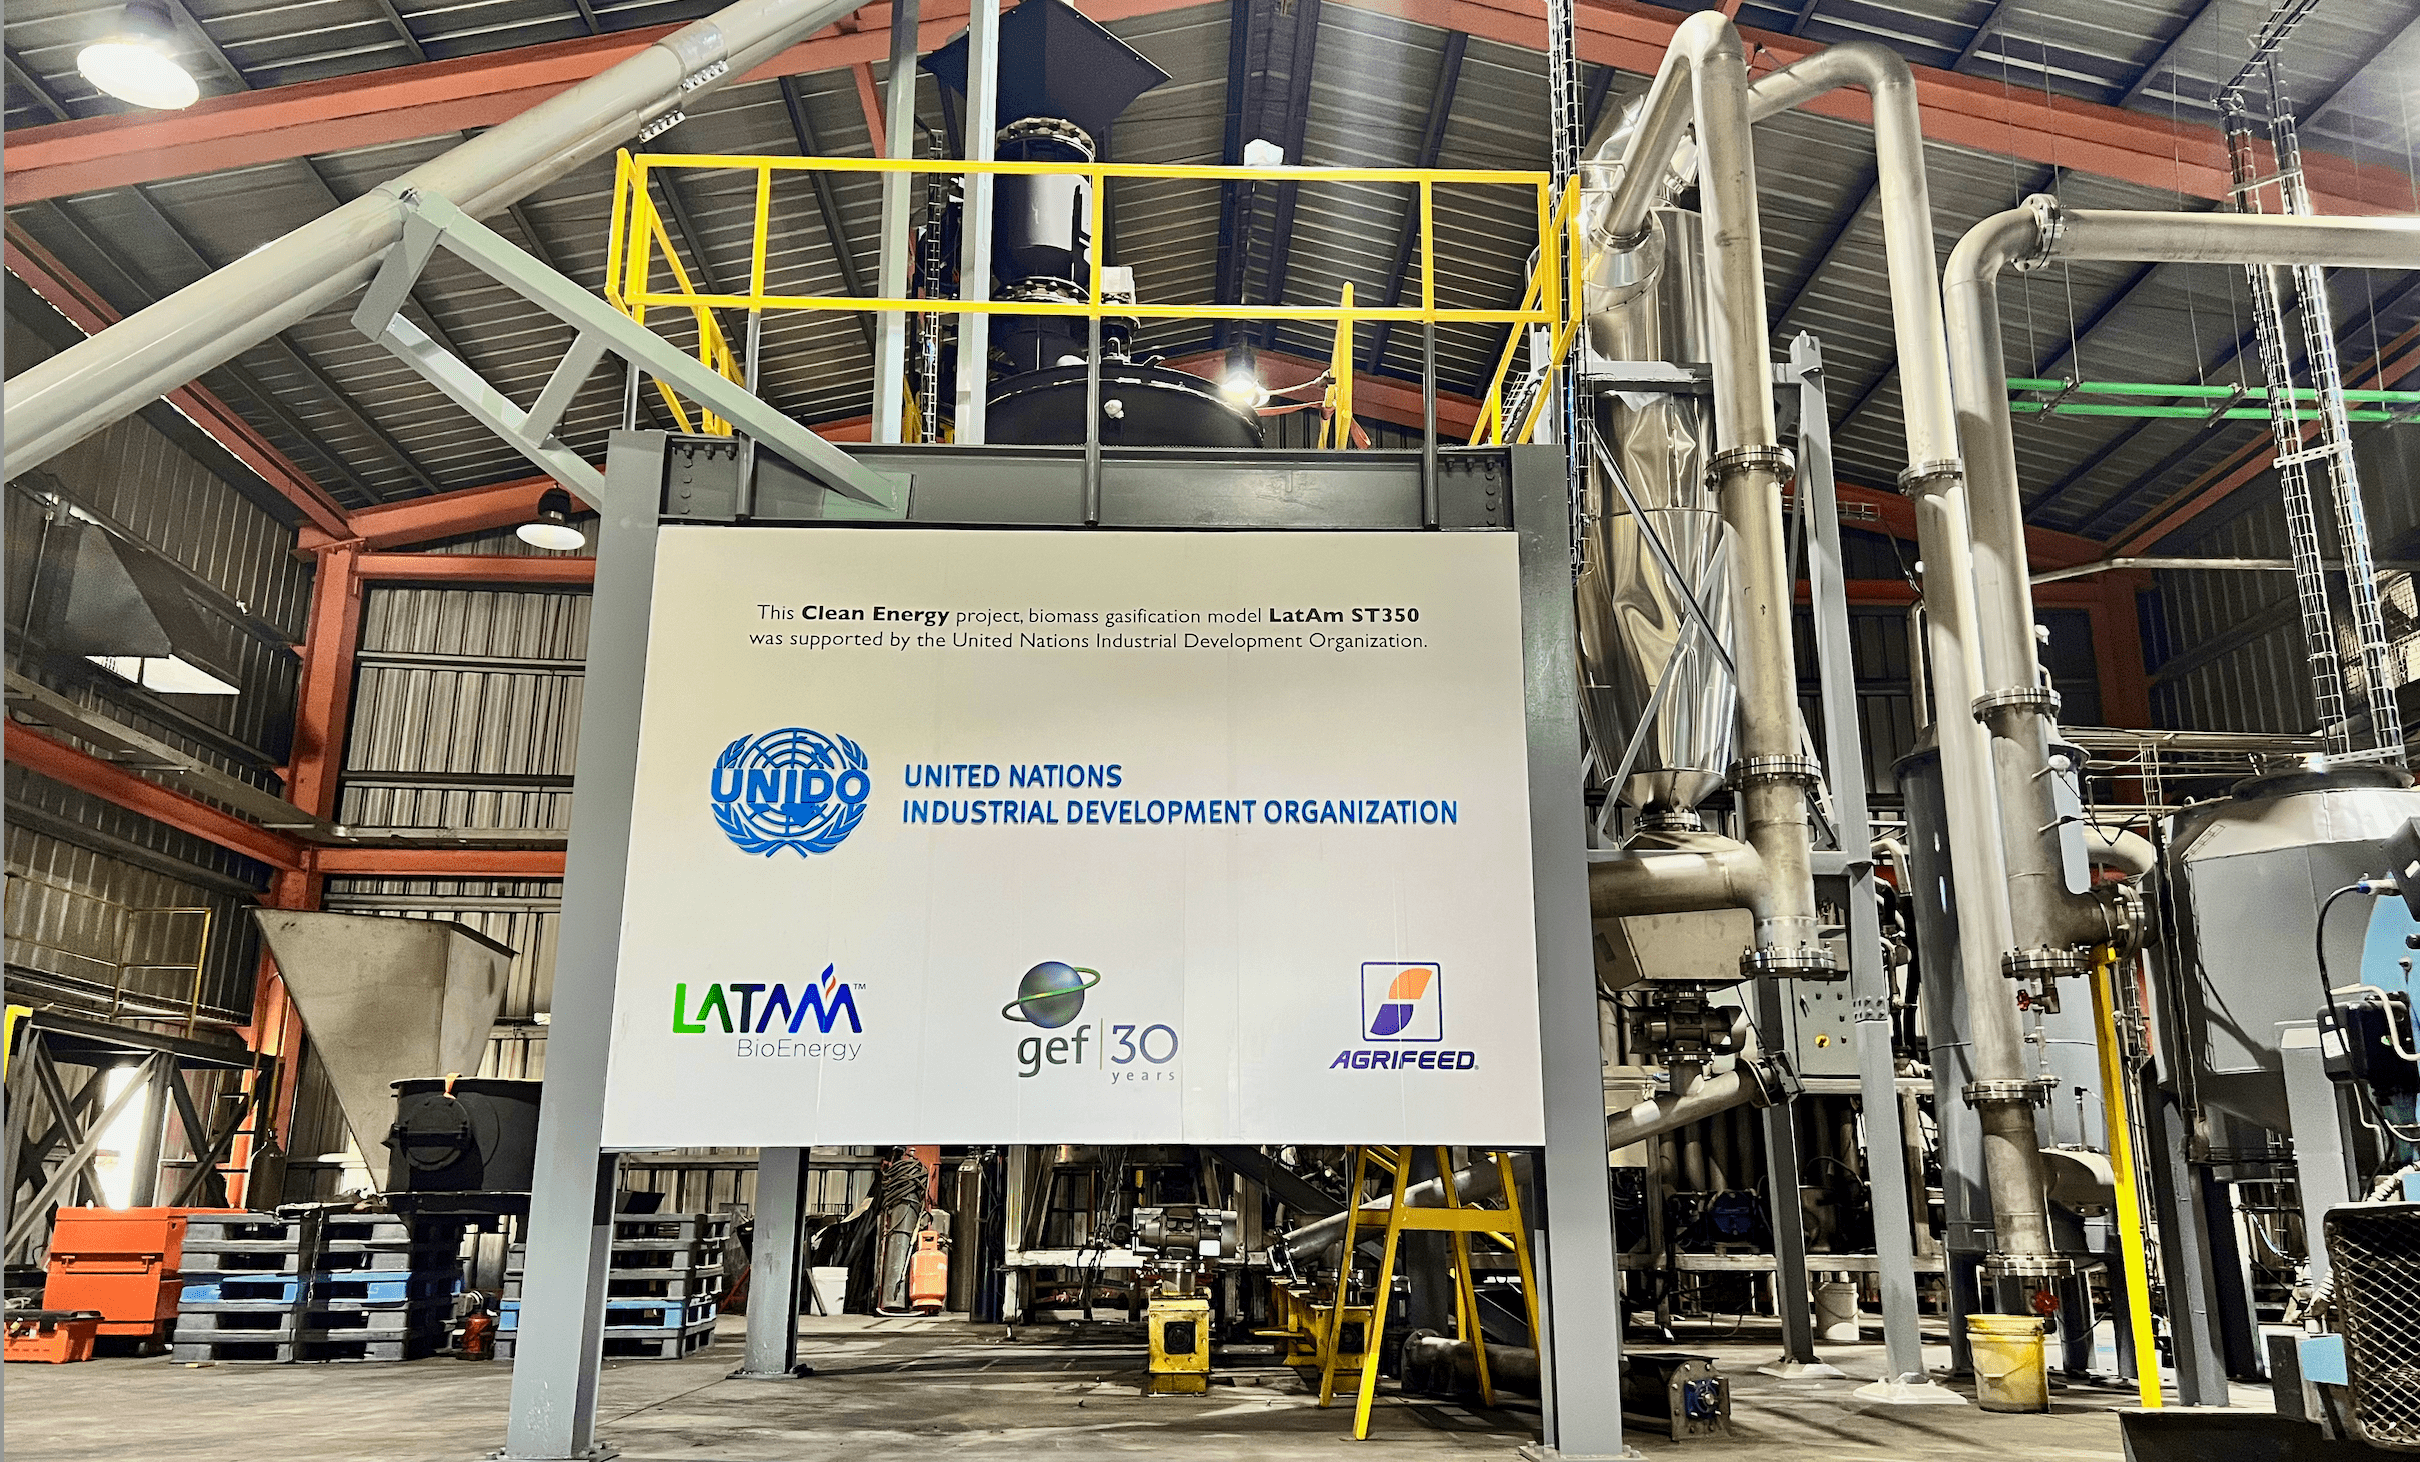 UNIDO and GEF support the Dominican Republic’s first downdraft-type biomass gasification plant integrating Artificial Intelligence